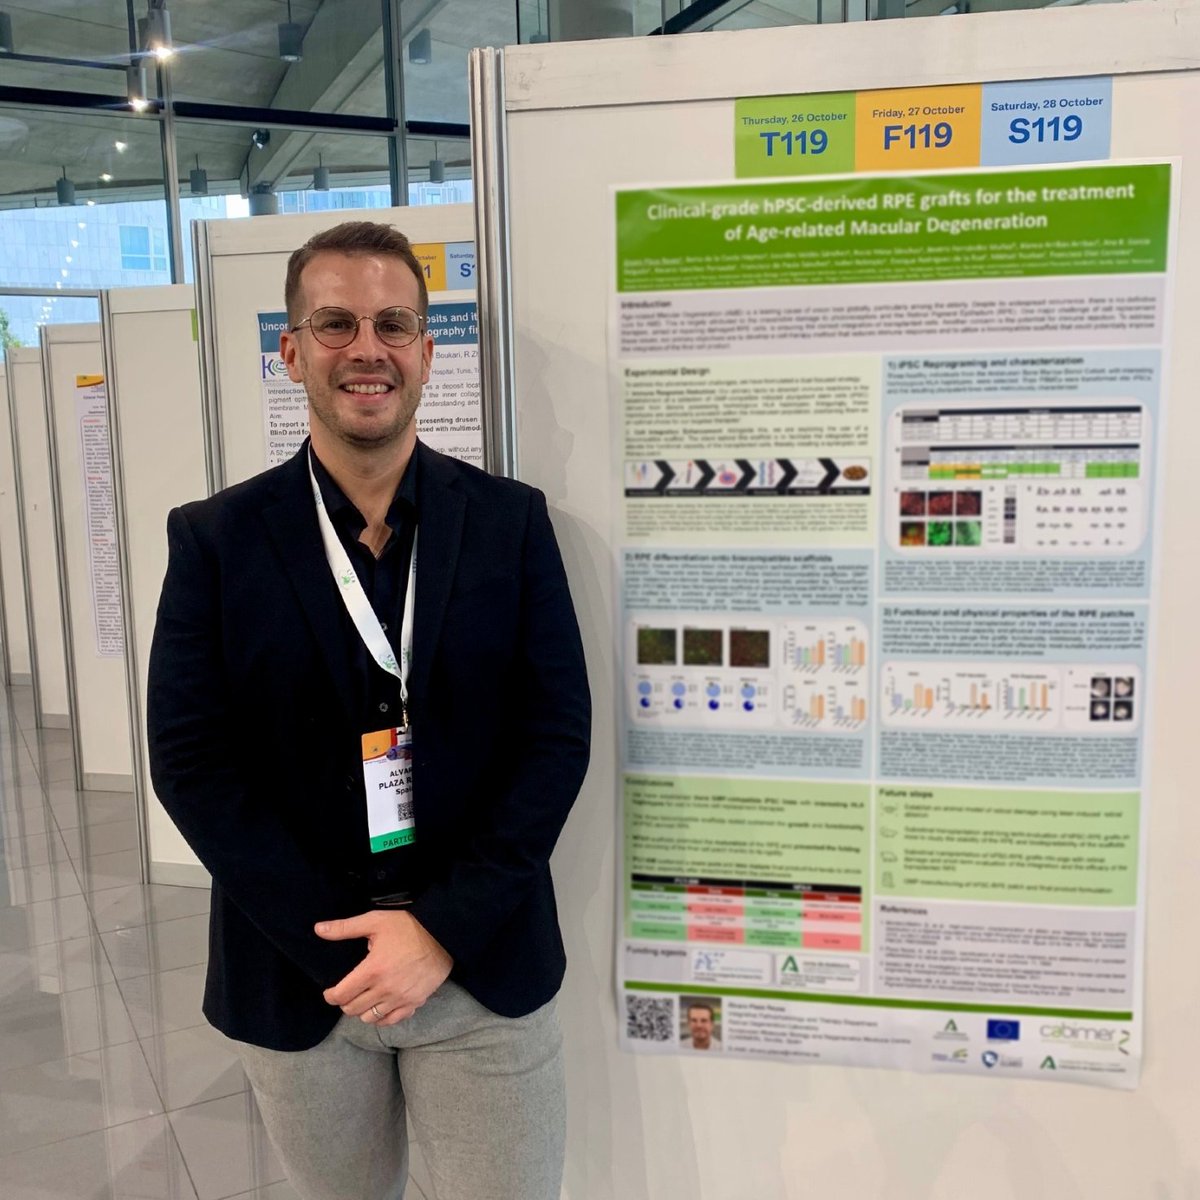 Thrilled to present my latest research on human pluripotent stem cell-derived retinal therapies for macular degeneration at #EVER2023 in Valencia! Grateful for the engaging discussions and invaluable feedback. #Ophthalmology #StemCellResearch #VisionScience #TravelGrant